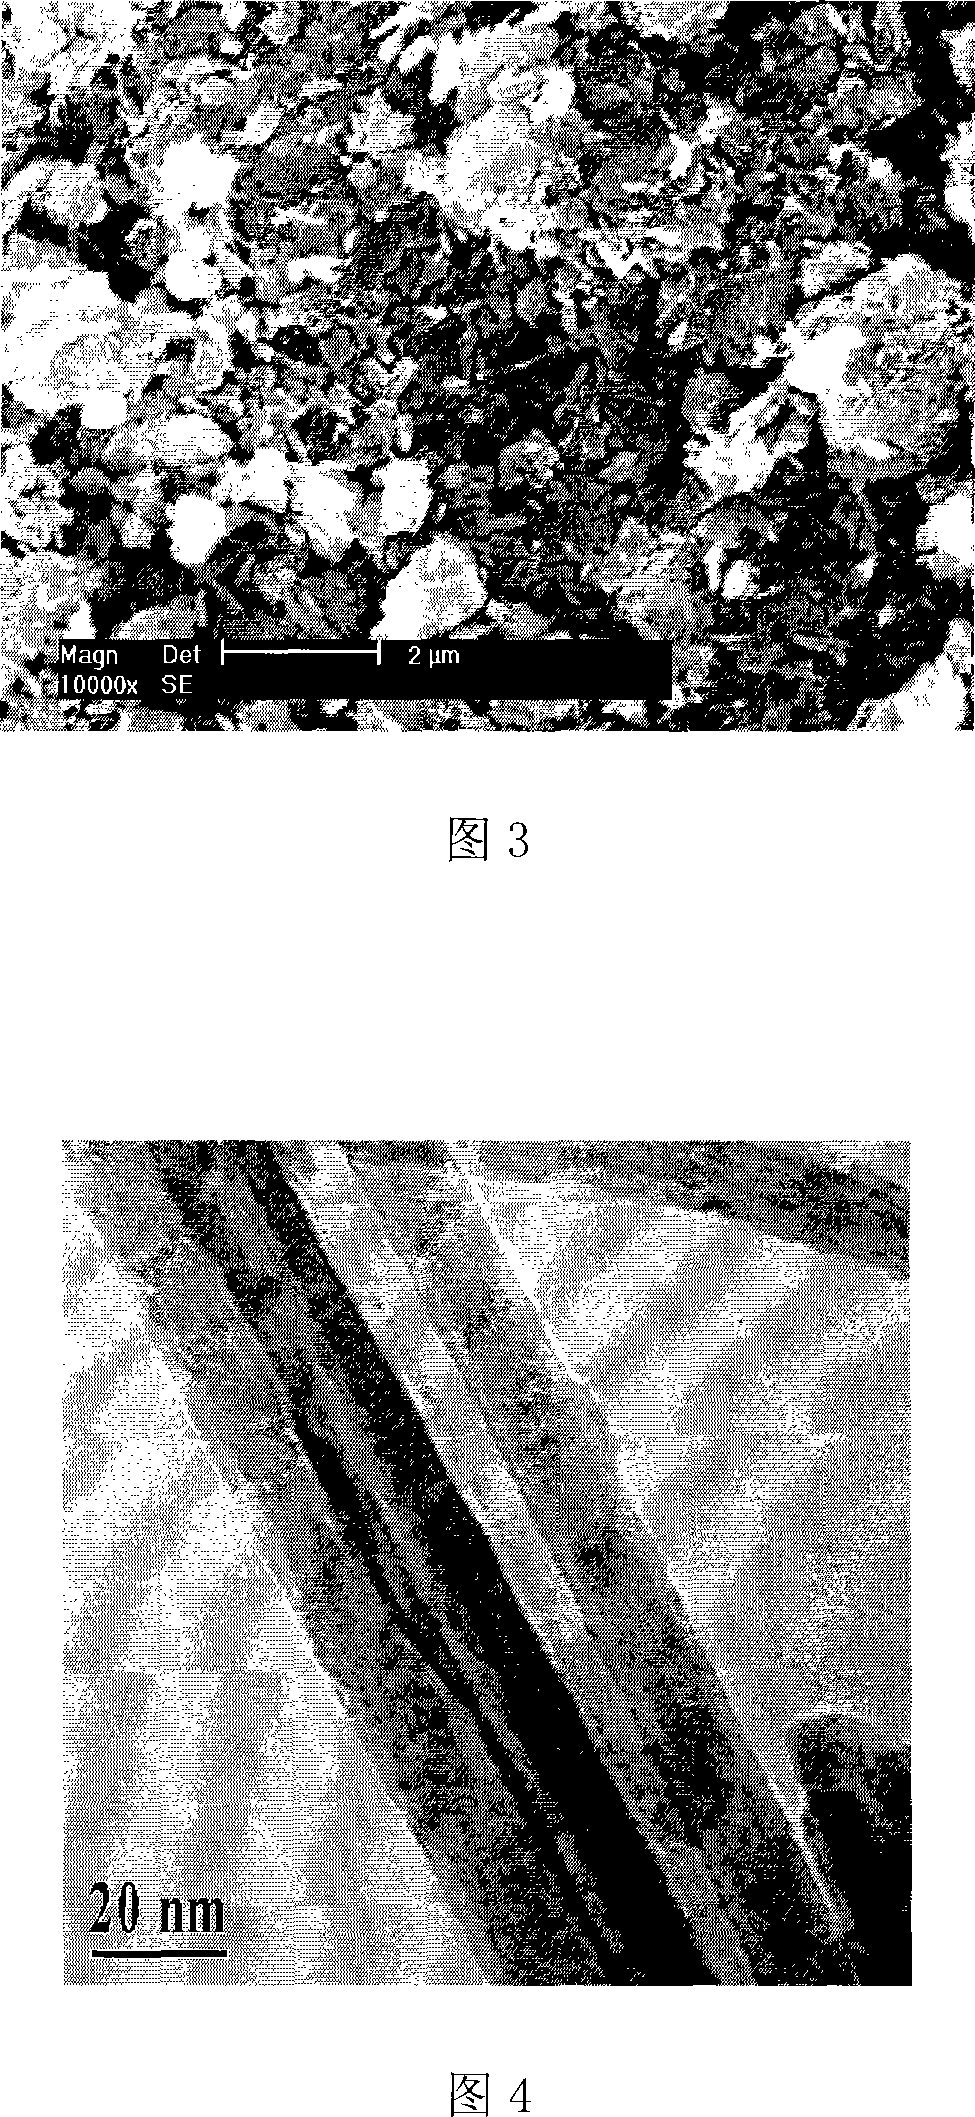 Method for purifying and processing attapulgite clay mineral